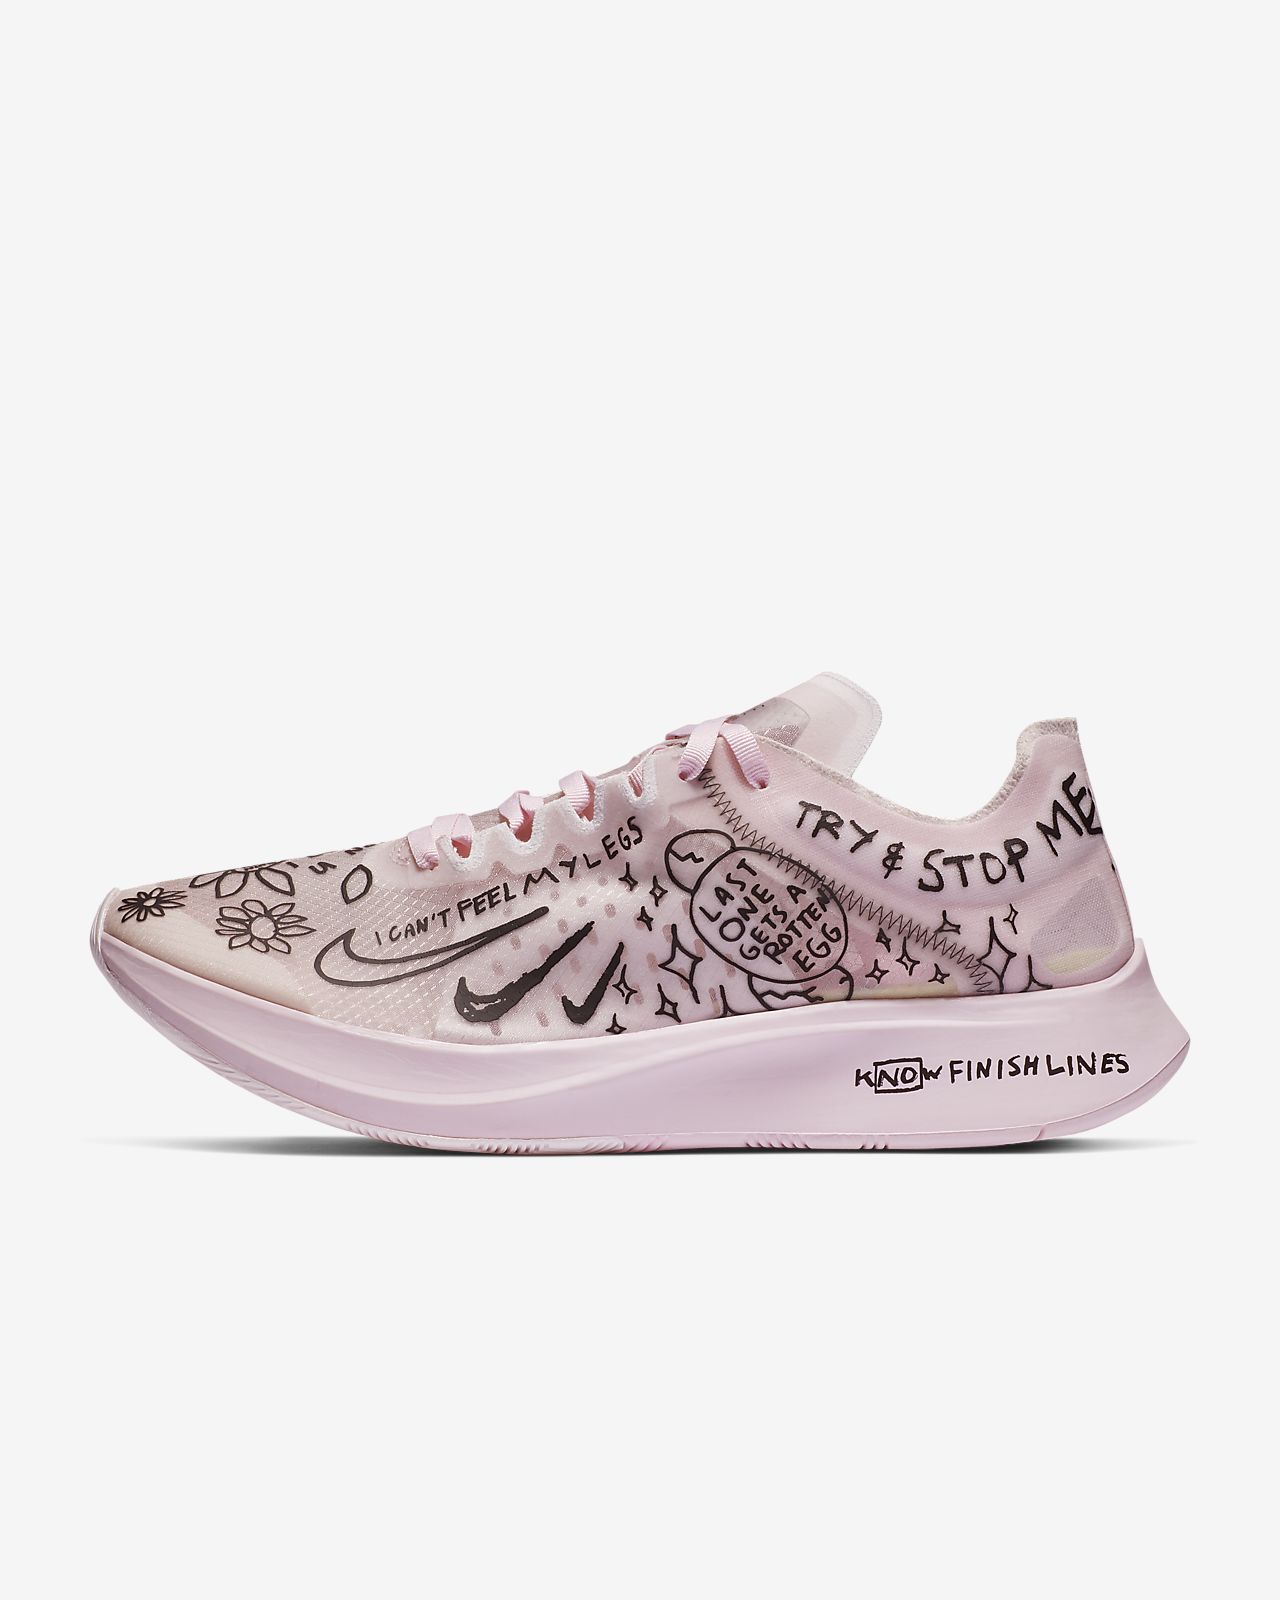 nathan bell nike zoom fly Online 